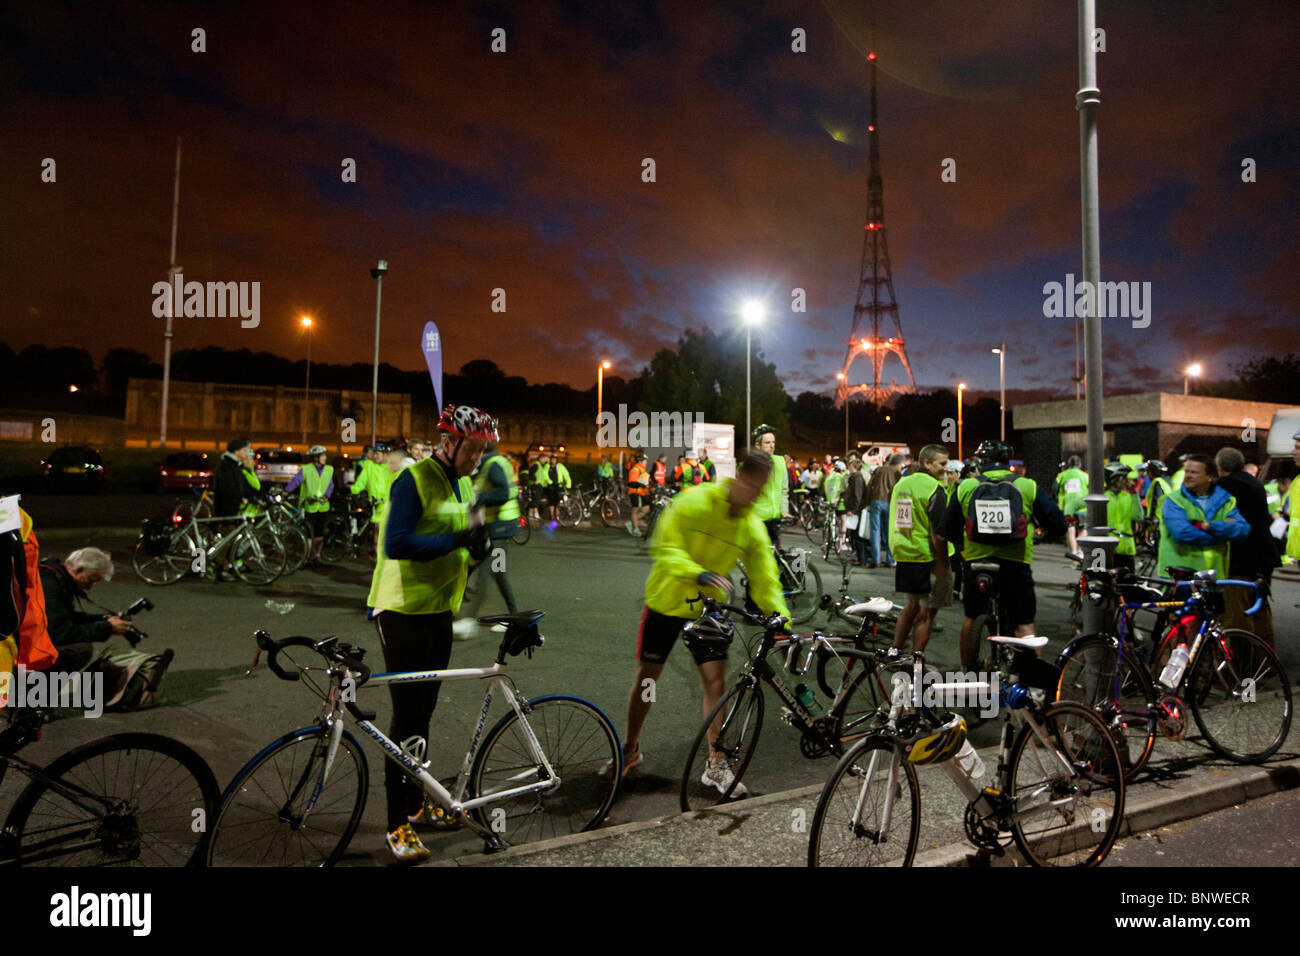 Cyclists in reflective vests prepare for the London Night Ride, London, United Kingdom Stock Photo